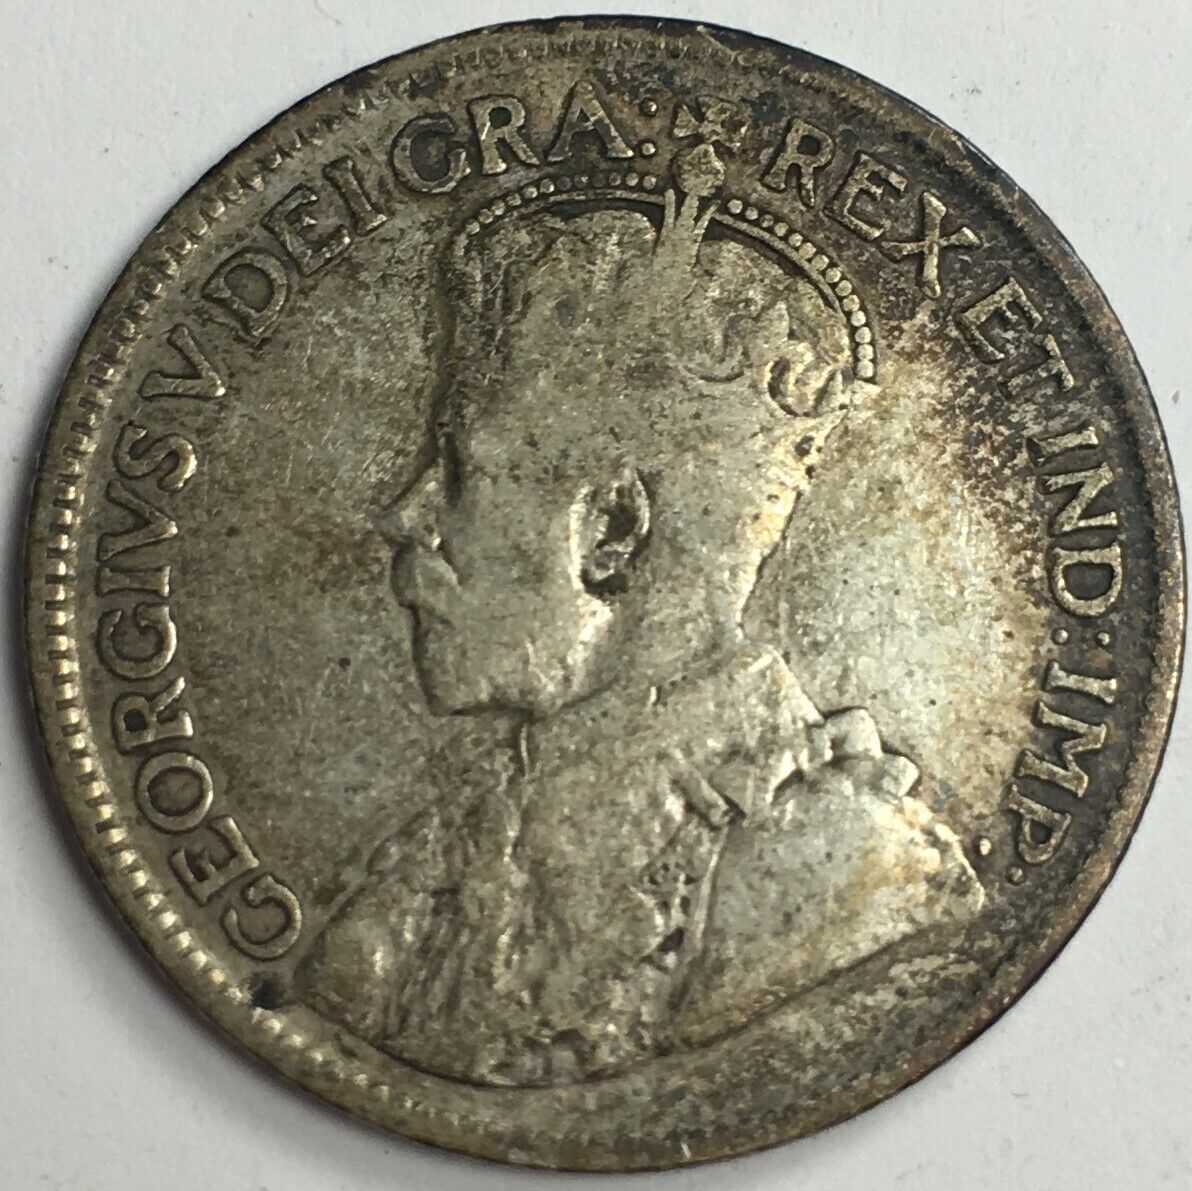 1919 Newfoundland 25 Cents - George V - 92.5% Silver Coin - Km#17 - 2464